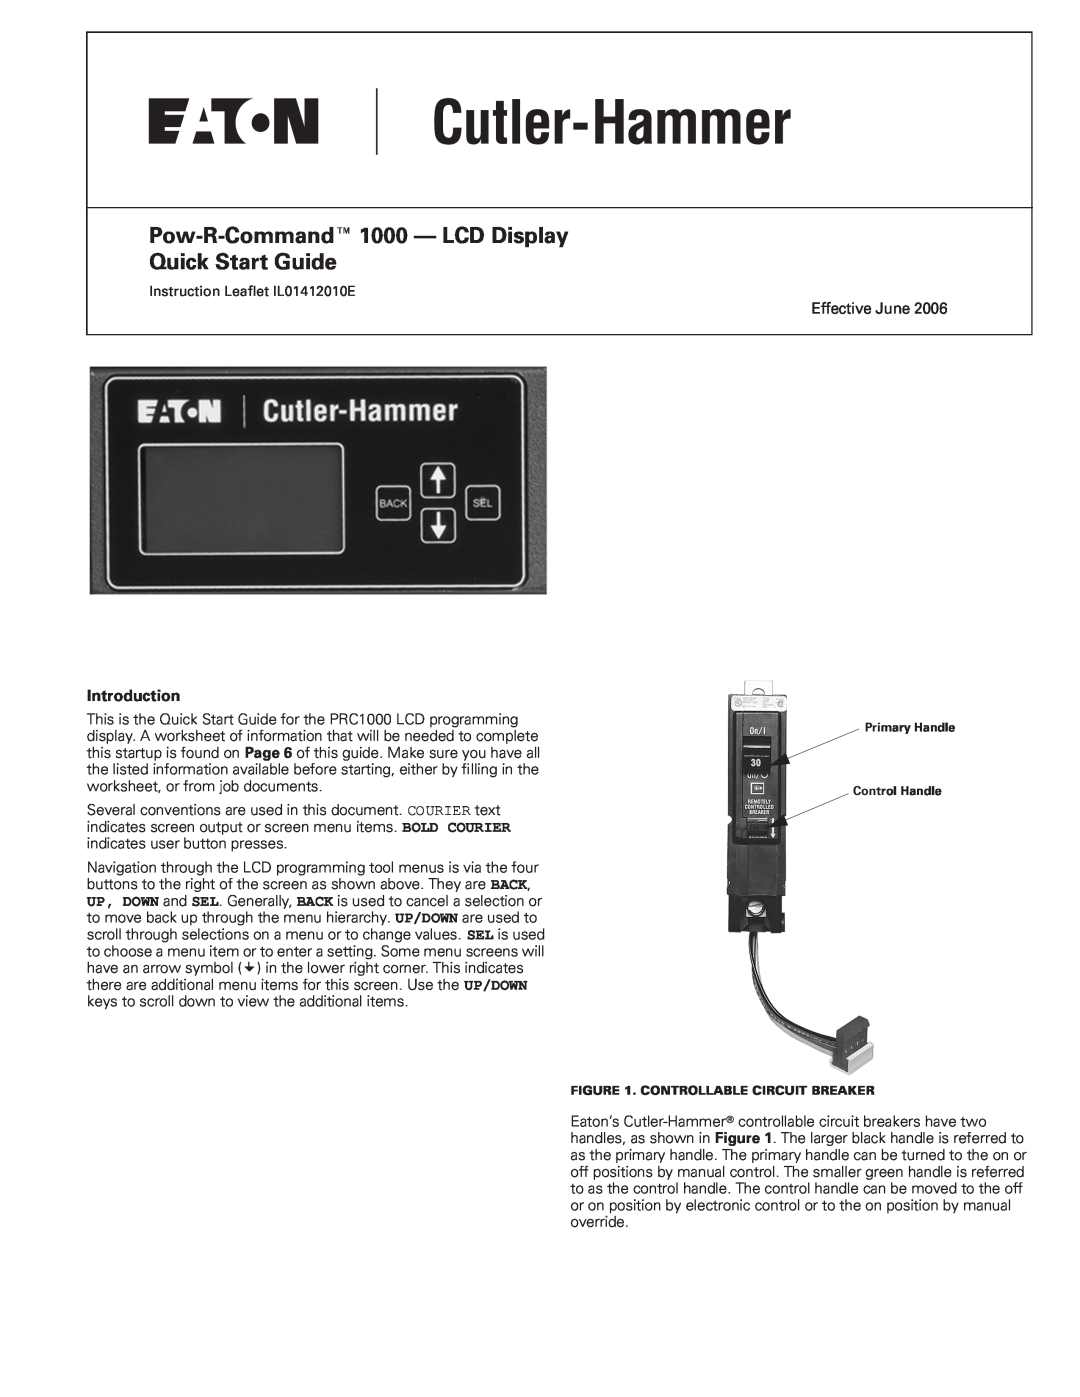 Eaton Electrical quick start Introduction, Pow-R-Command 1000 - LCD Display Quick Start Guide, Effective June 